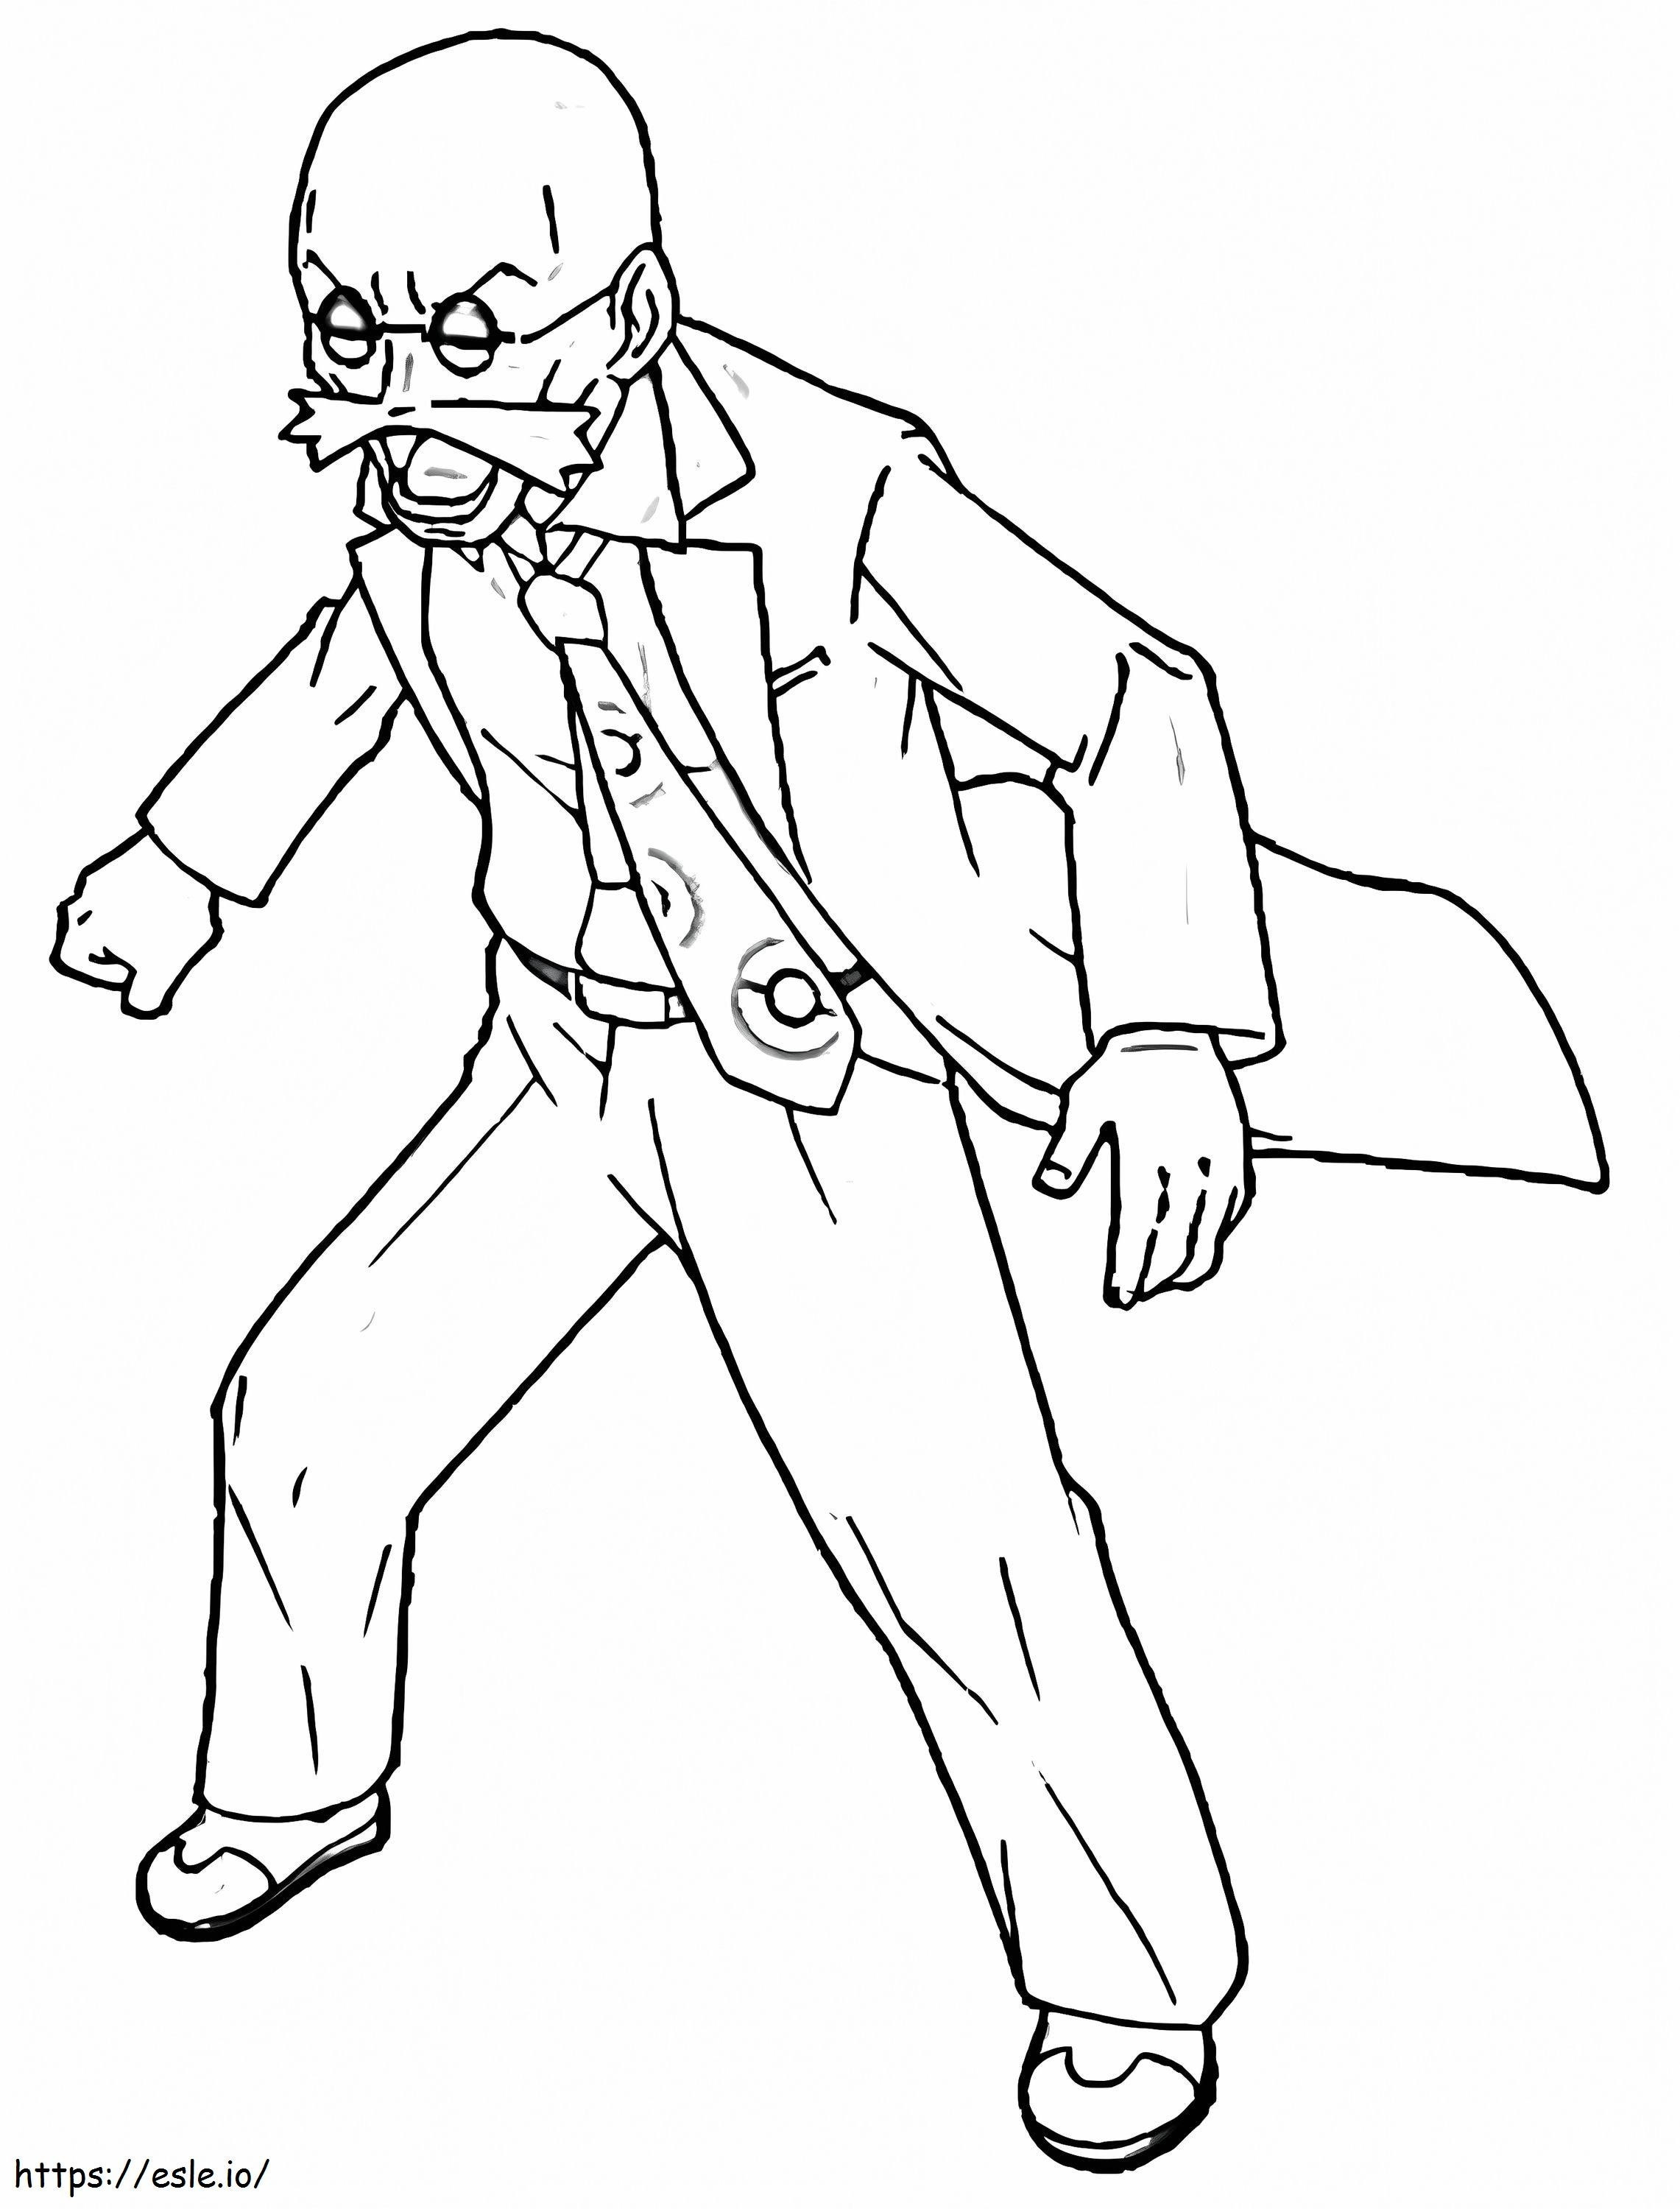 Blaine Pokemon Gym Leader coloring page